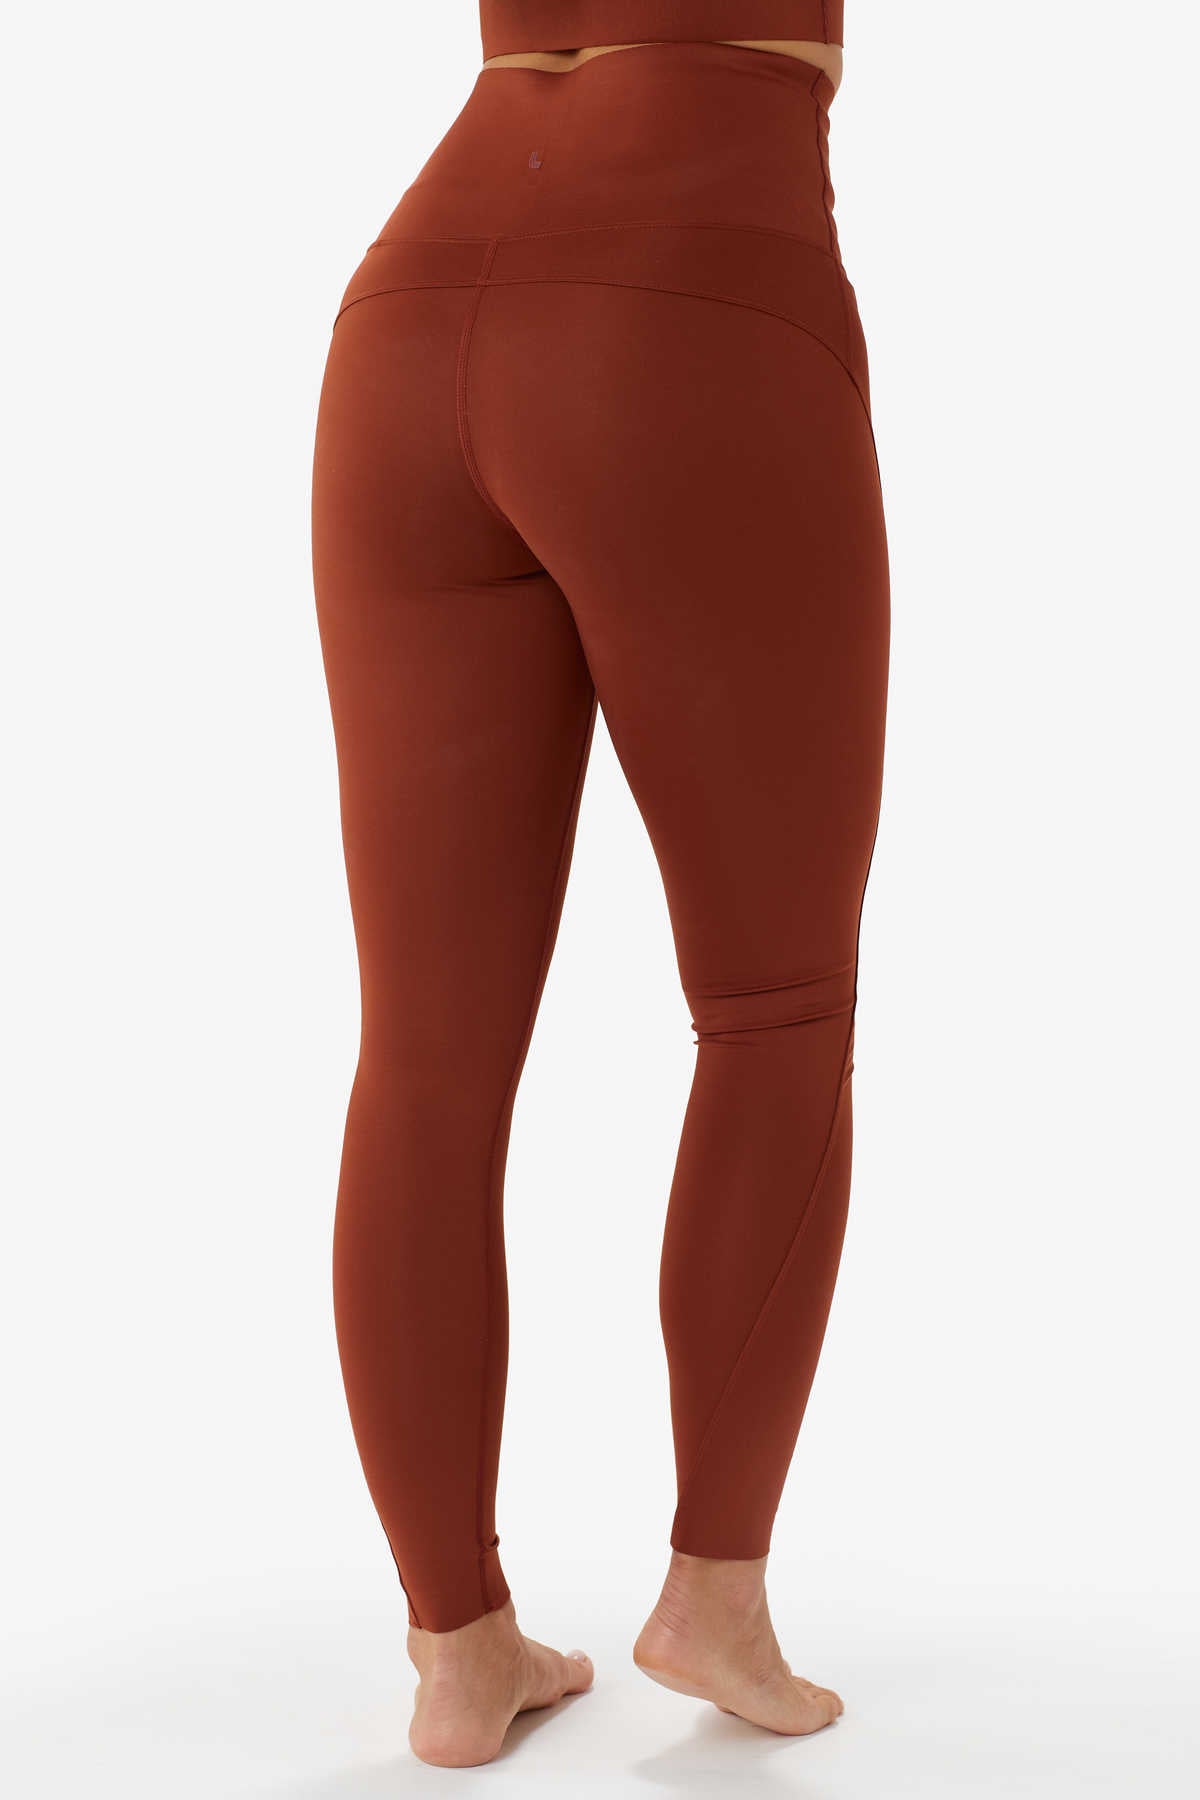 Lole - Mile End High Waisted Ankle Legging